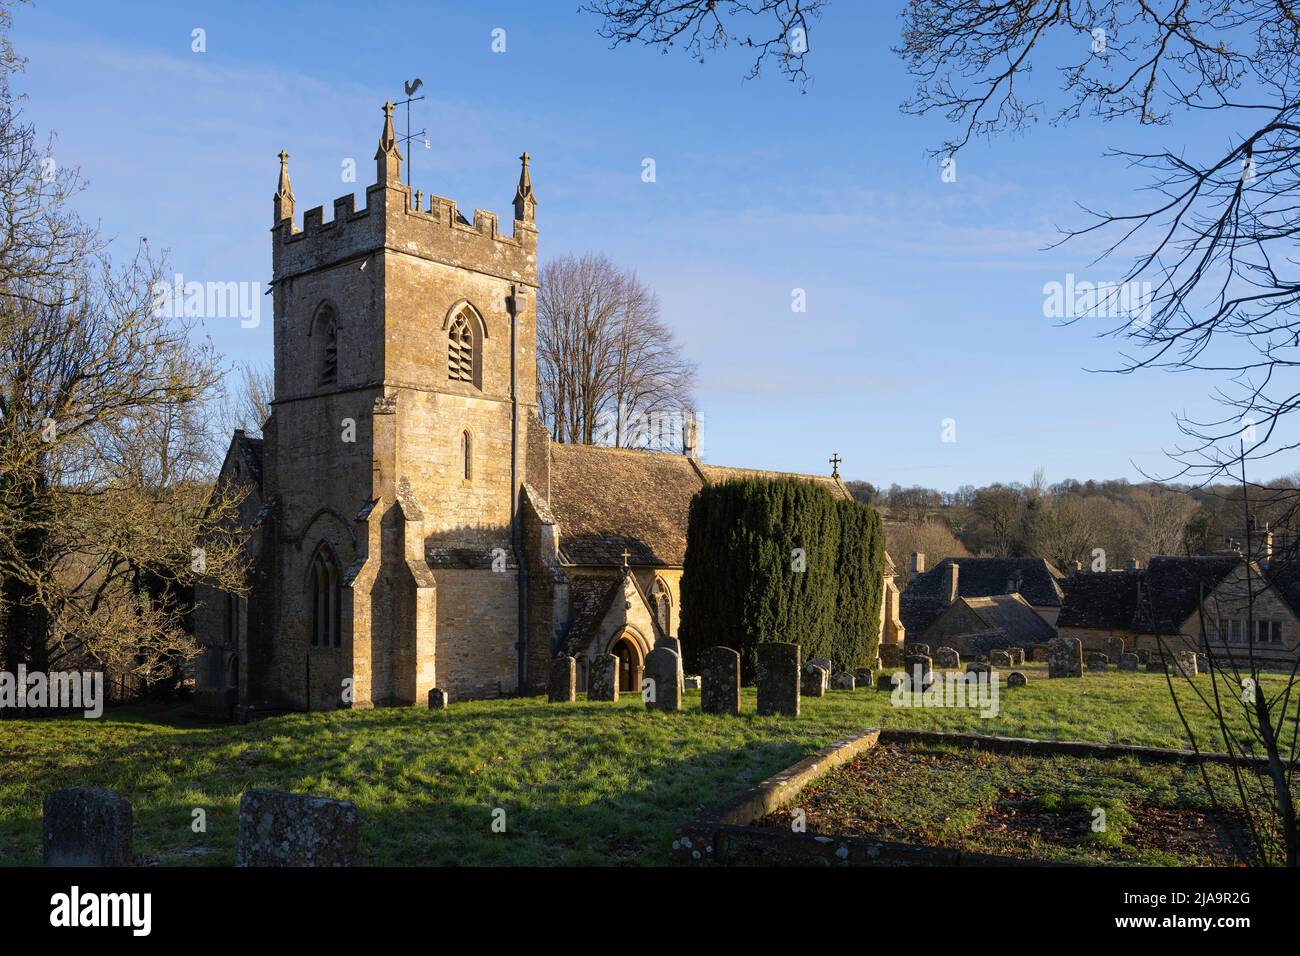 The Cotswold church at Upper Slaughter, Gloucestershire, England. Stock Photo